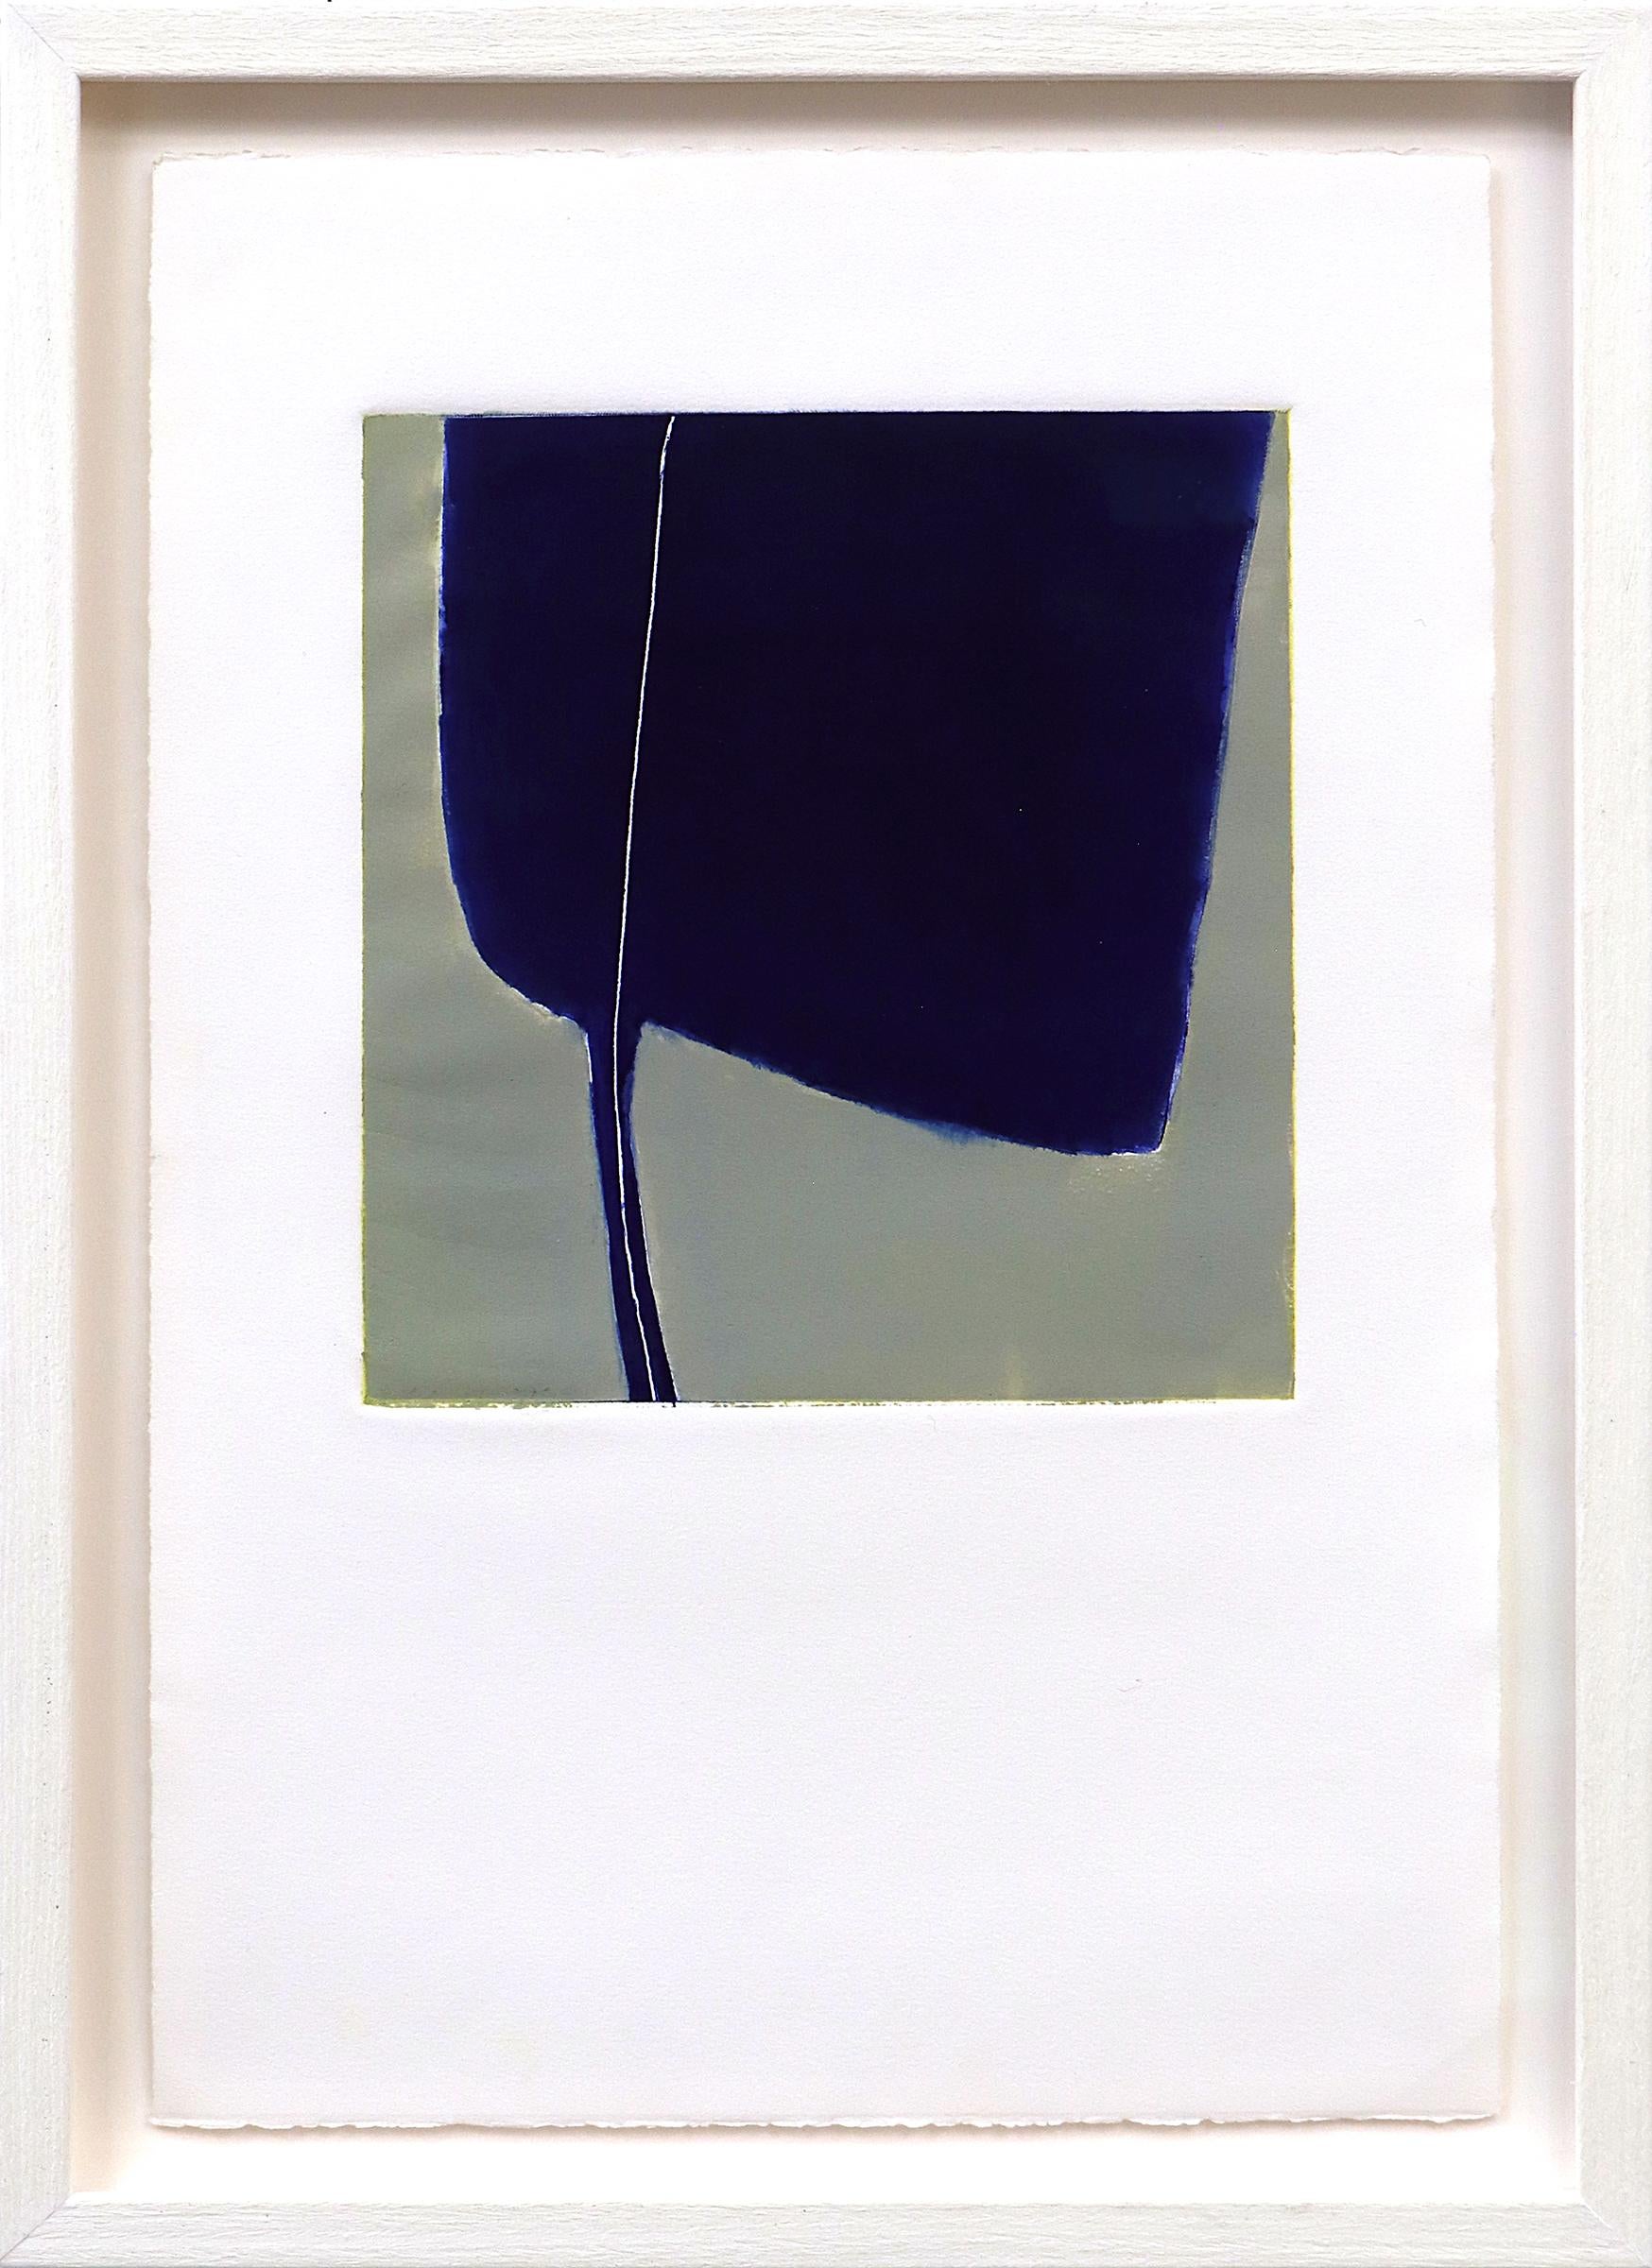 Set of three original abstract artworks by Denver modernist, Wilma Fiori (1929-2019).  The abstract compositions were created in colors of blue, gray, red and white and were created in the late 20th to early 21st century. Each monotype is presented